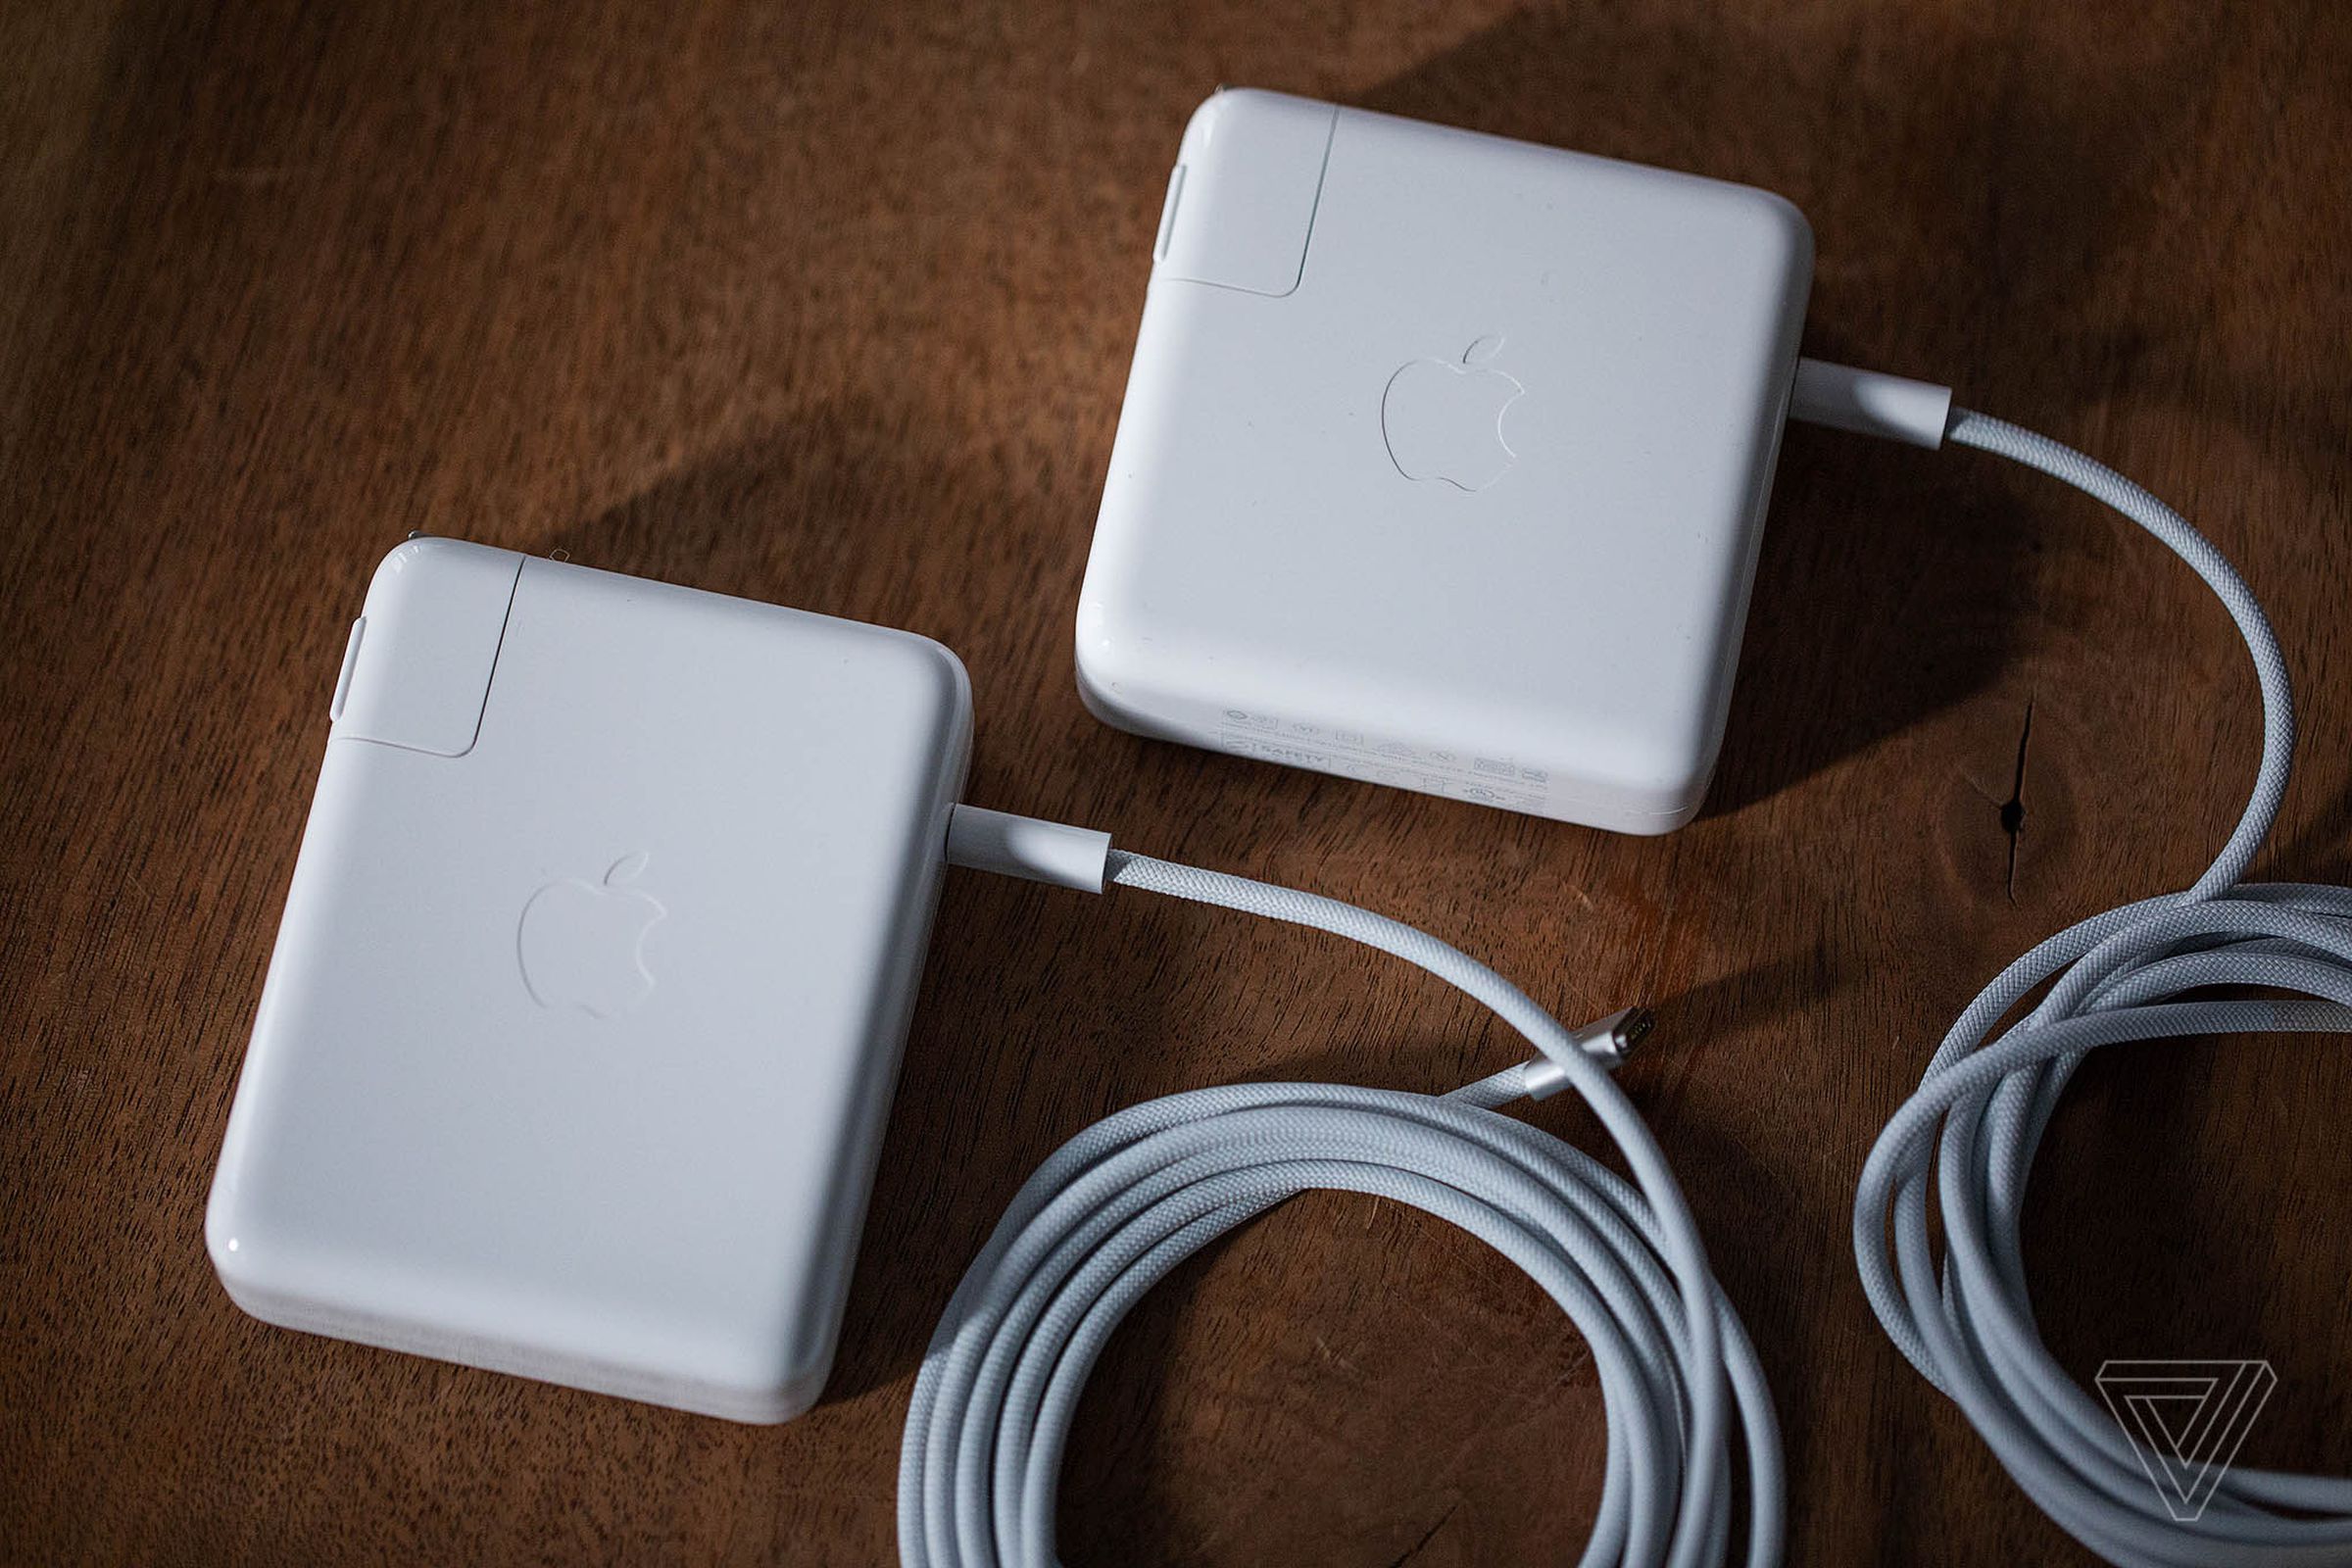 The MacBook Pro 16 can only fast charge with a 140-watt or higher charging brick connected to its MagSafe port.